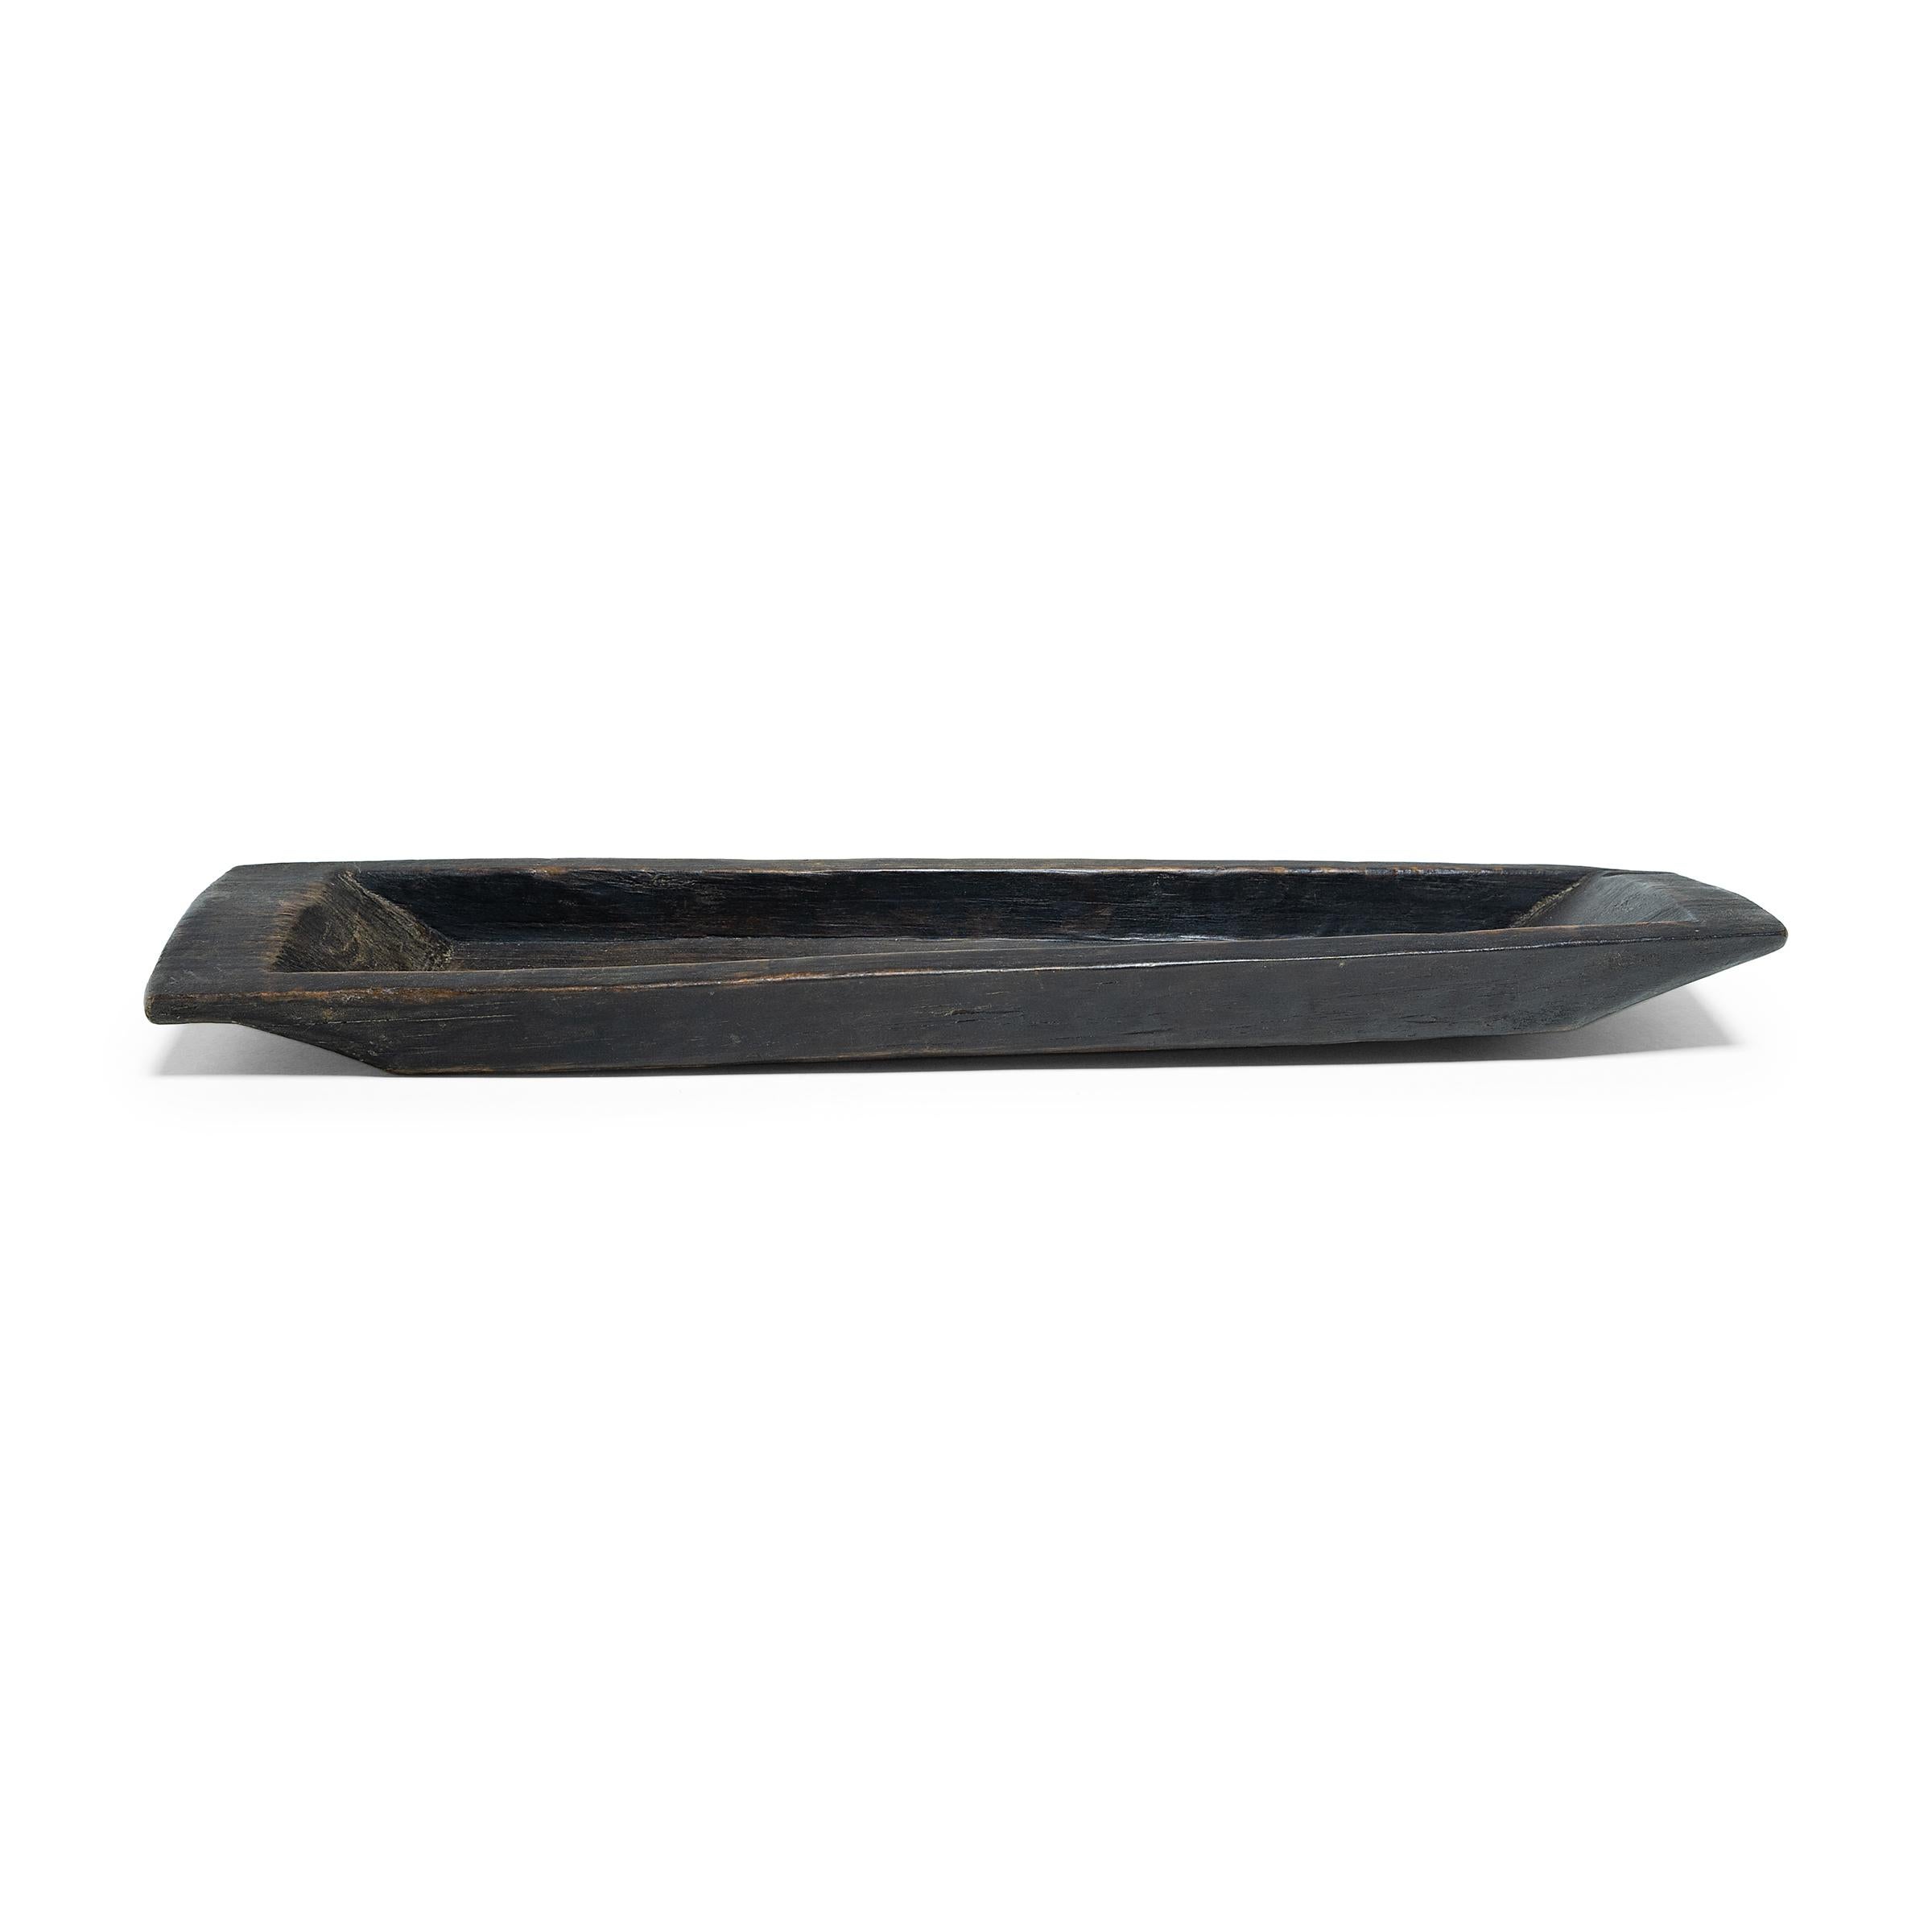 This antique wooden tray perfectly balances minimalist simplicity and rustic charm. Carved from a plank of wood, the tray has a long and narrow form, shaped with a shallow interior, straight sides and tapered ends that flatten into handles. Stained